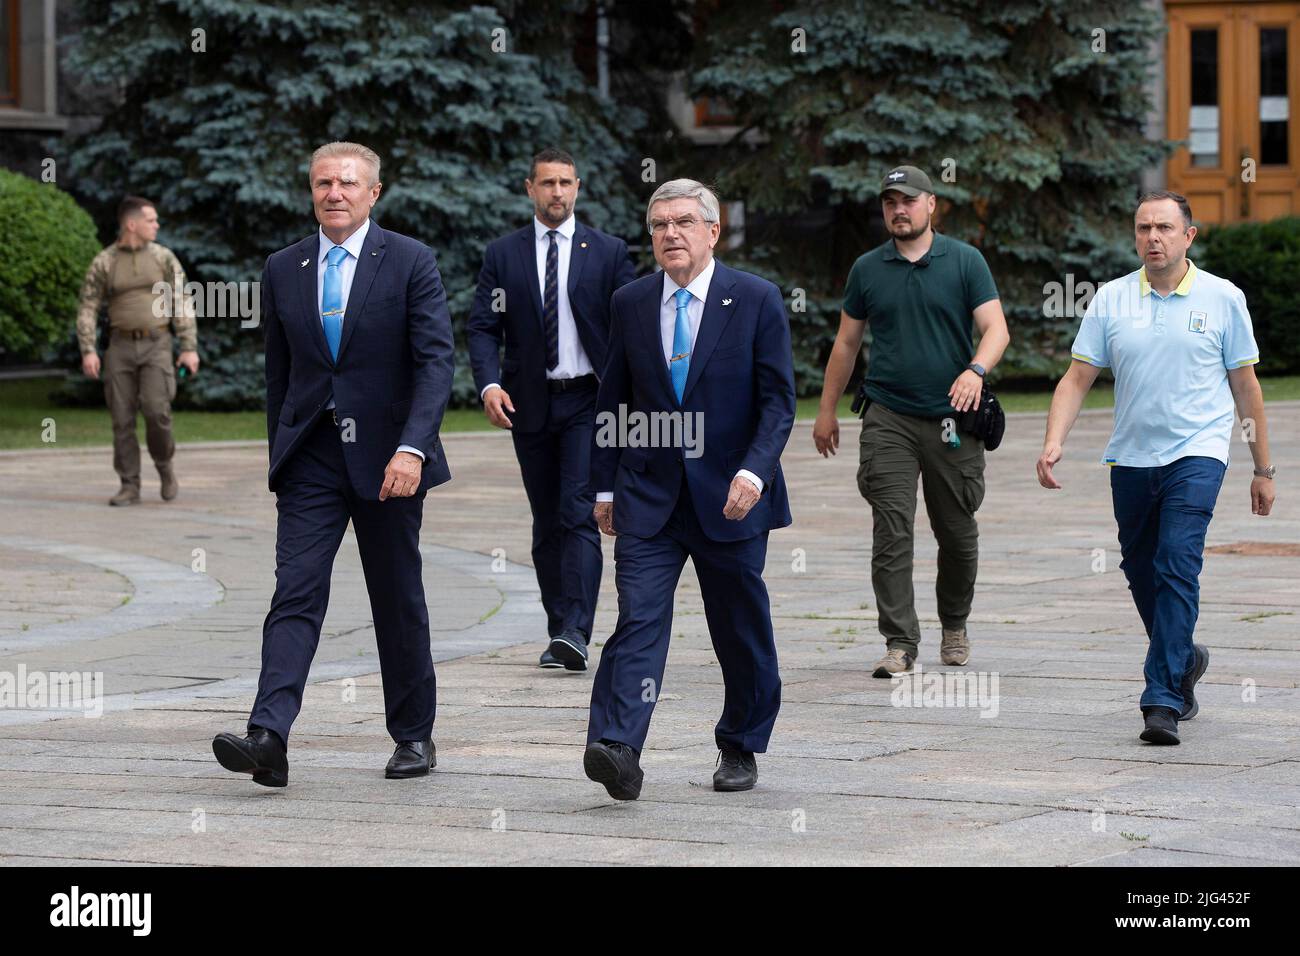 Kyiv, Ukraine. 03 July, 2022. International Olympic Committee President Thomas Bach, right, walks with Ukraine National Olympic Committee head Sergii Bubka left, on their way to the Mariinskyi Palace, July 3, 2022 in Kyiv, Ukraine.  Credit: Ukraine Presidency/Ukrainian Presidential Press Office/Alamy Live News Stock Photo